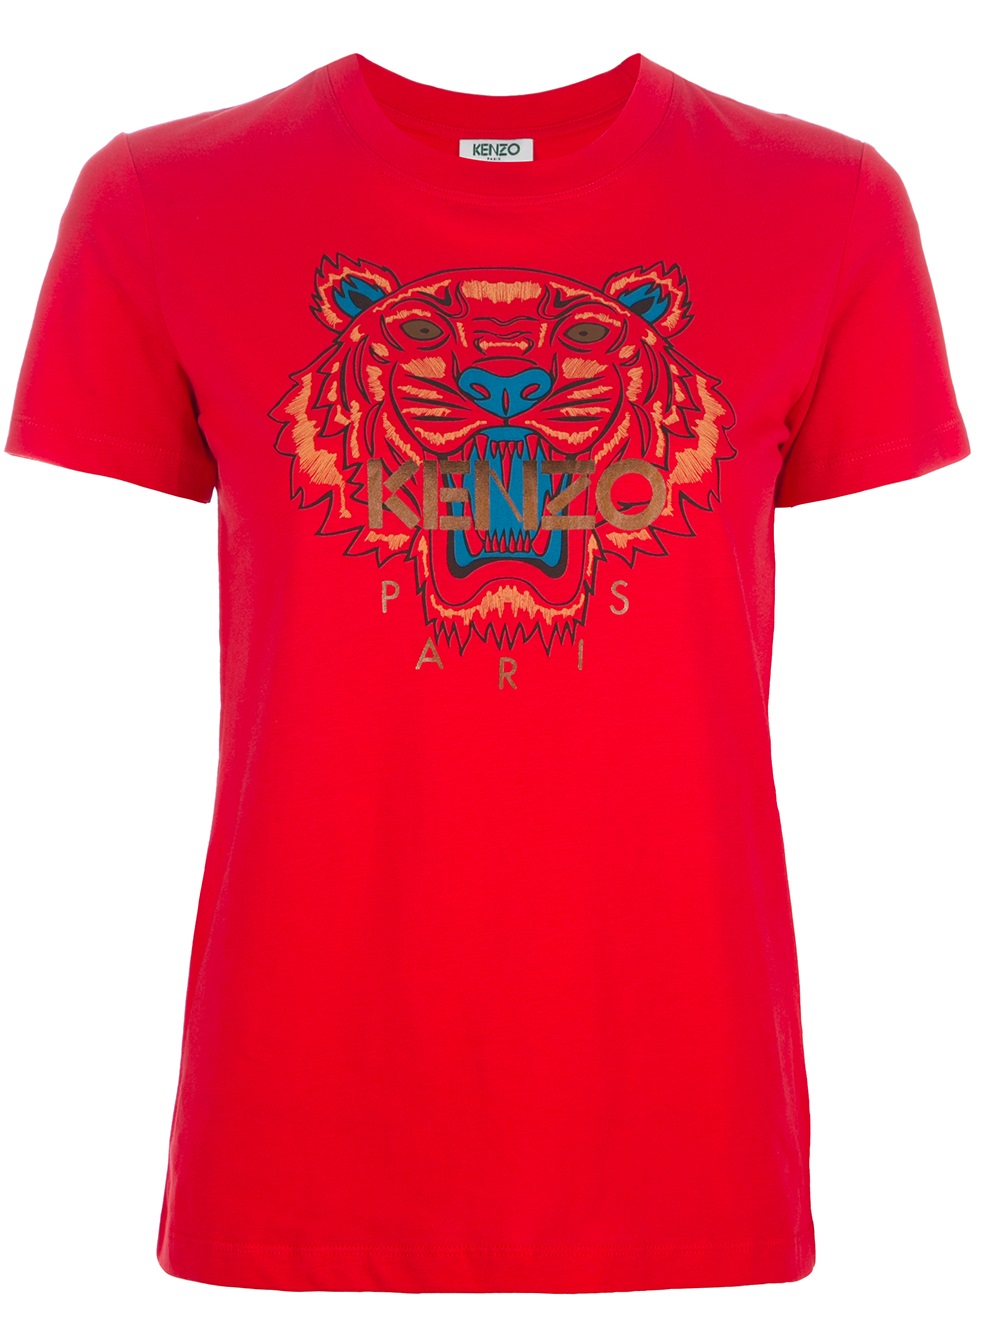 KENZO Tiger Print Tshirt in Red - Lyst